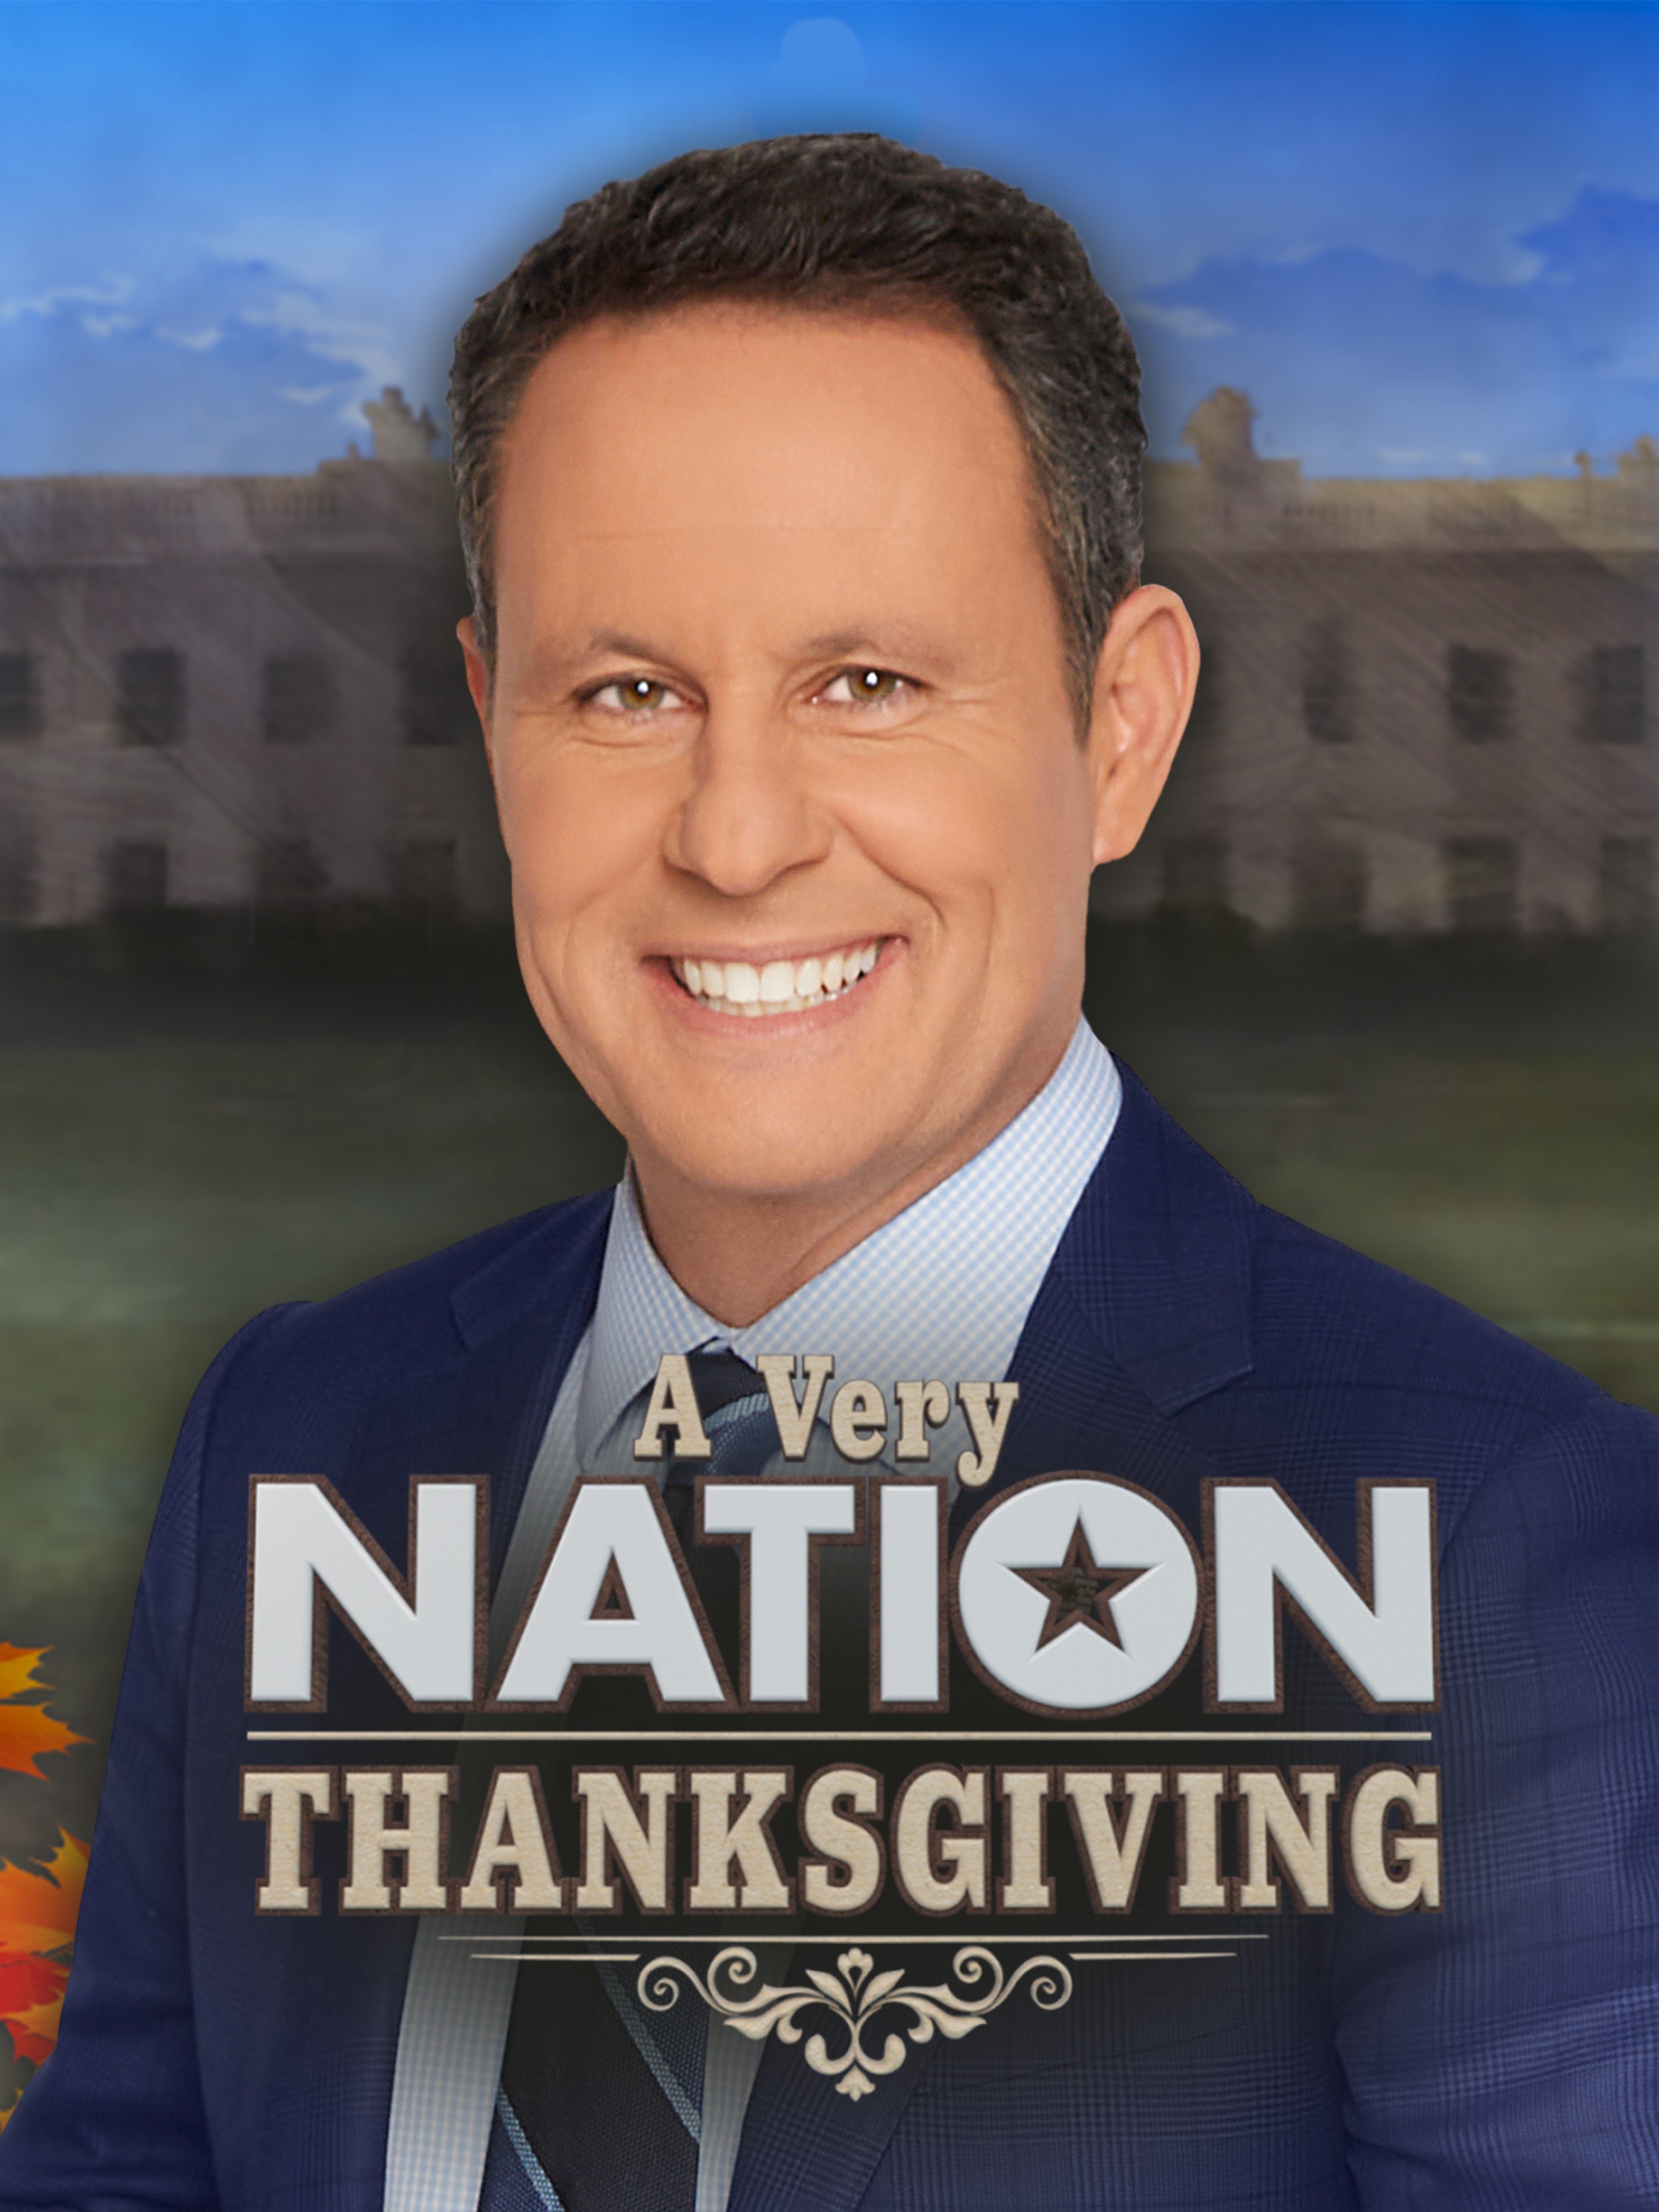 A Very Nation Thanksgiving dcg-mark-poster